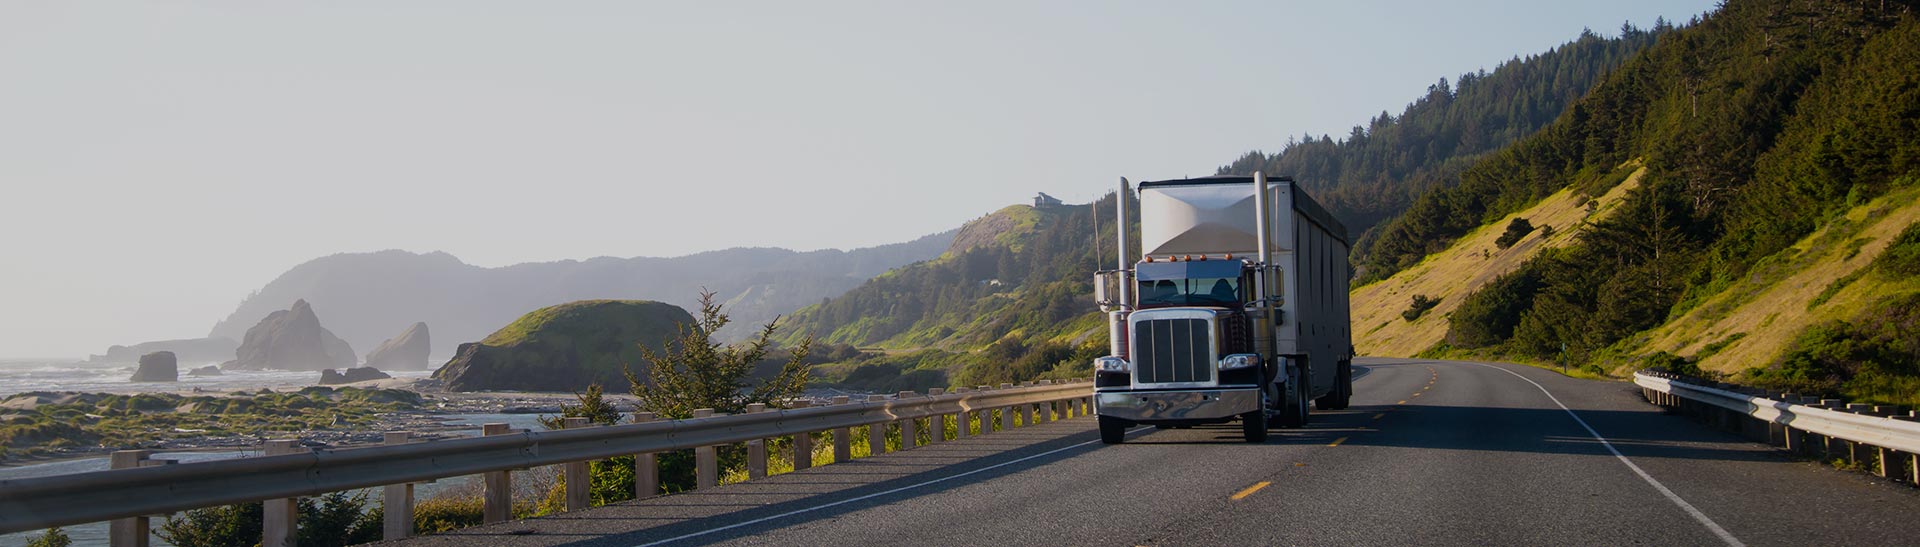 Jackson Trucking Company, Trucking Services and Long Haul Trucking